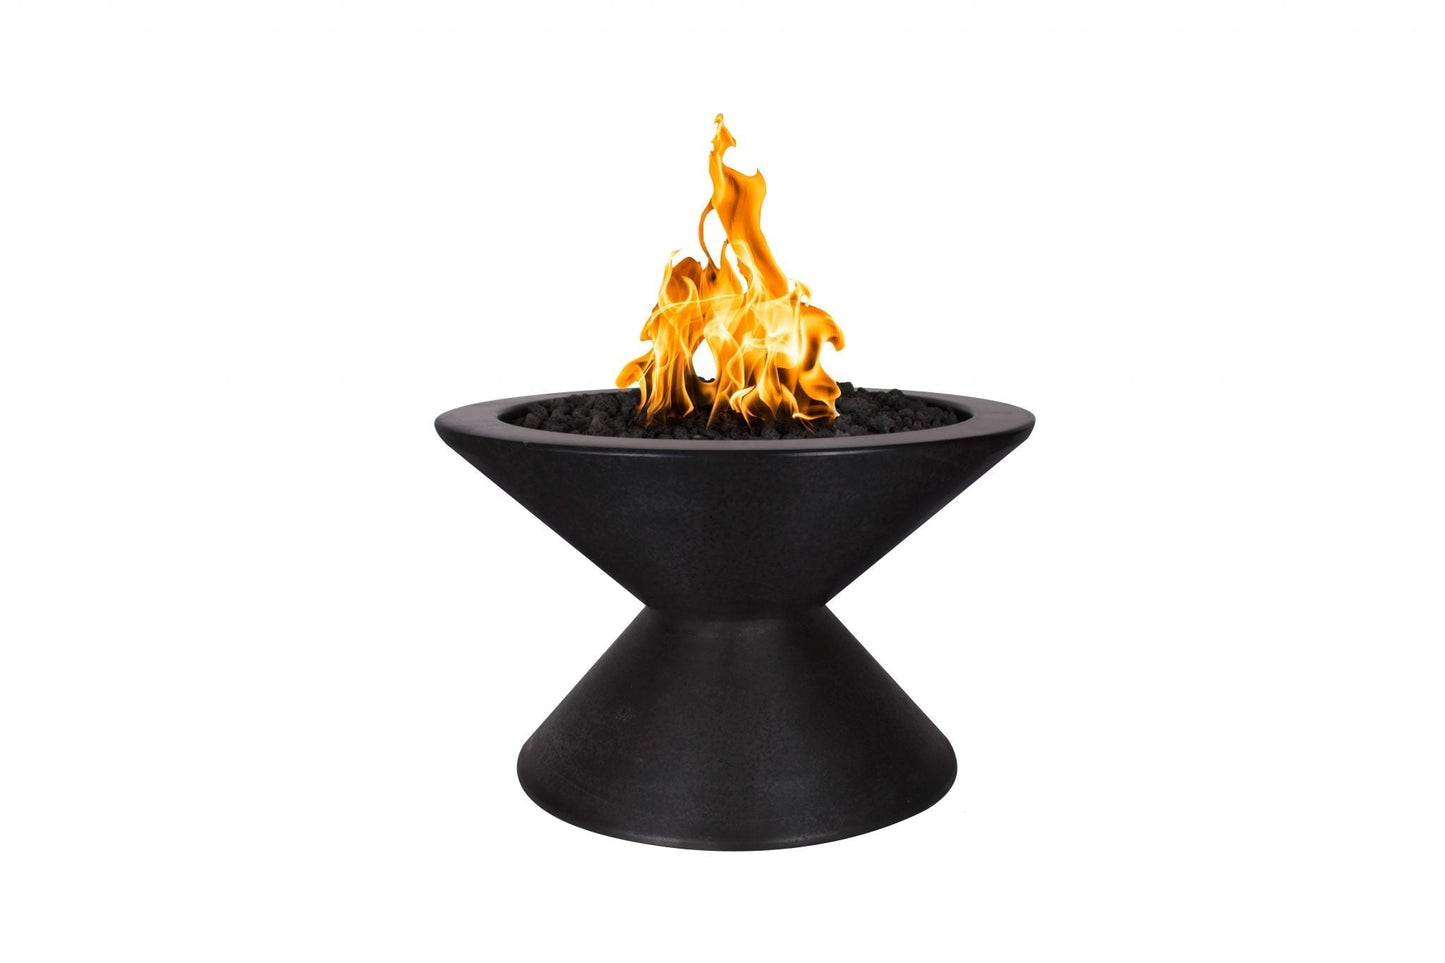 The Outdoor Plus Round Lucia 31" Chocolate GFRC Concrete Liquid Propane Fire Pit with 110V Electronic Ignition